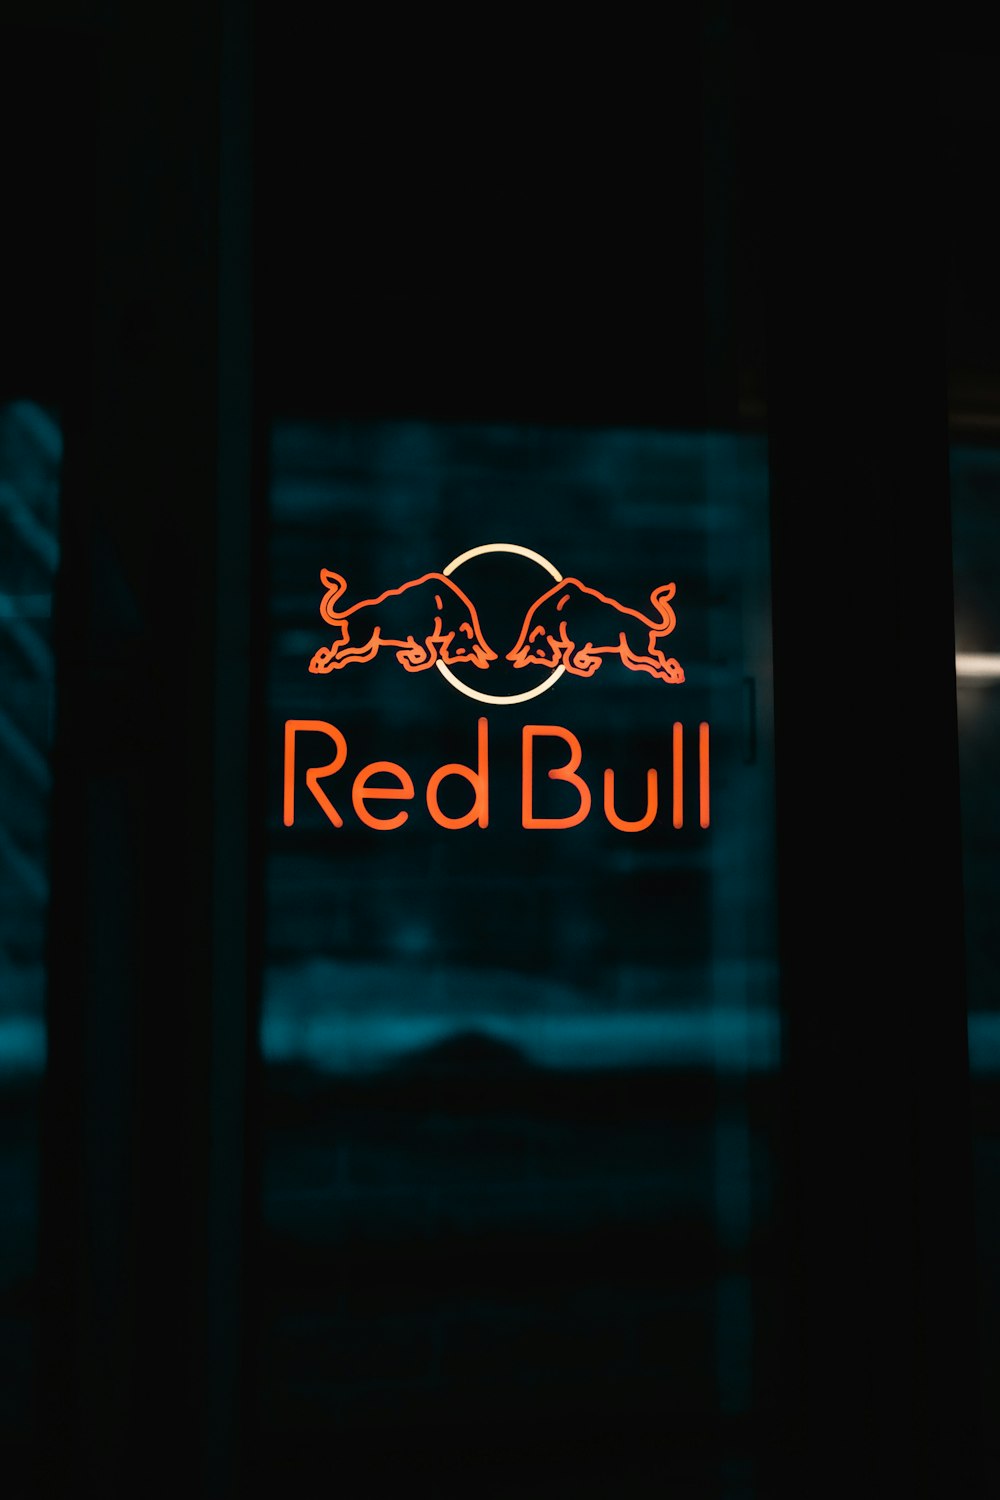 a red bull sign is lit up in the dark